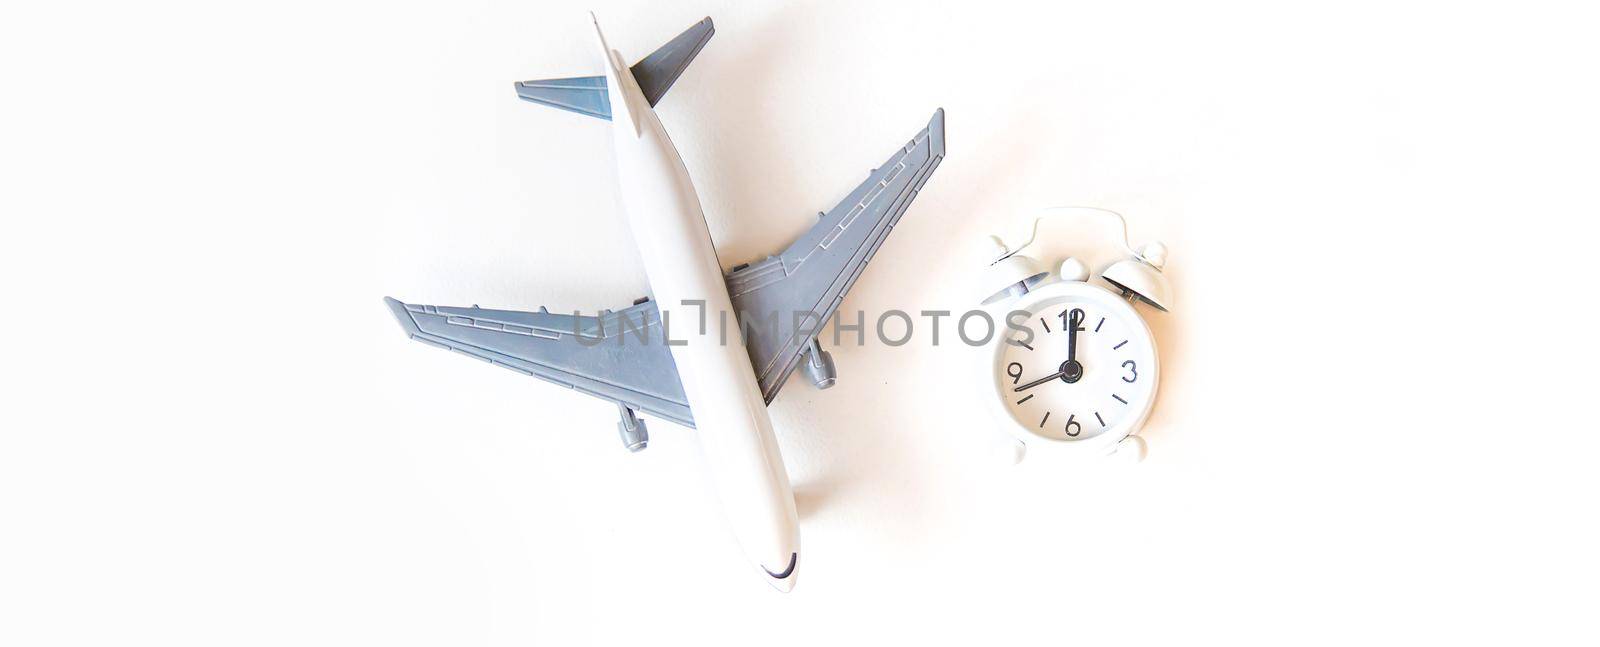 airplane isolate on a white background. Selective focus. by mila1784